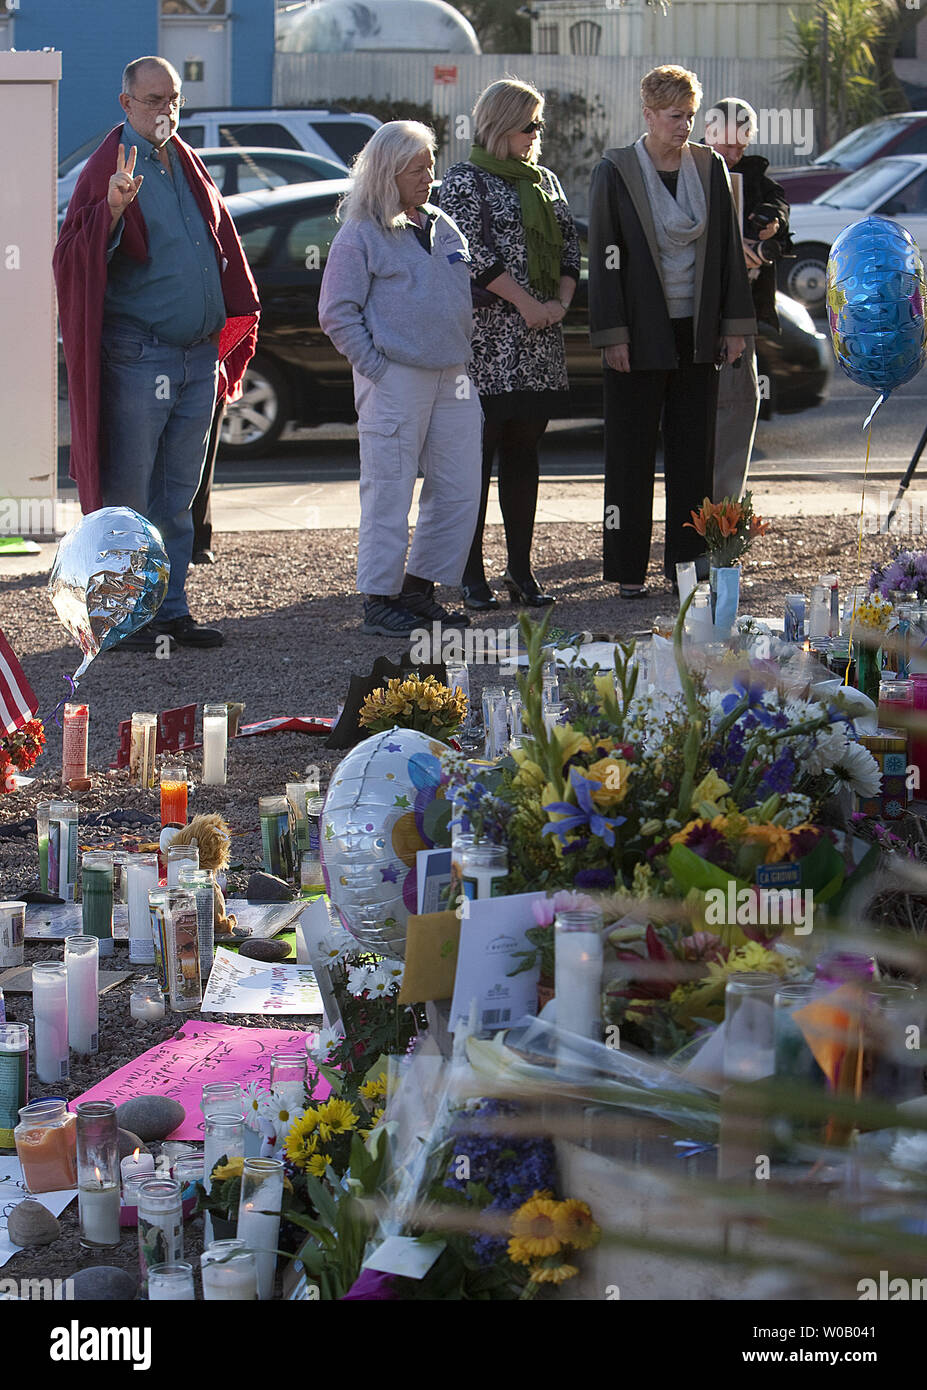 Outside the offices of U.S. Rep. Gabrielle Giffords mouirners observe a national moment of silence at 9 A.M. MDT two days after a young gunman shot and killed six people incuding U.S District Judge John Roll and critically wounded U.S Representative Gabrielle Giffords in Florence, Arizona on January 9, 2011.    The assassination attempt occurred near a northern Safeway in Tucson on January 8, 2011.       UPI/Gary C. Caskey Stock Photo